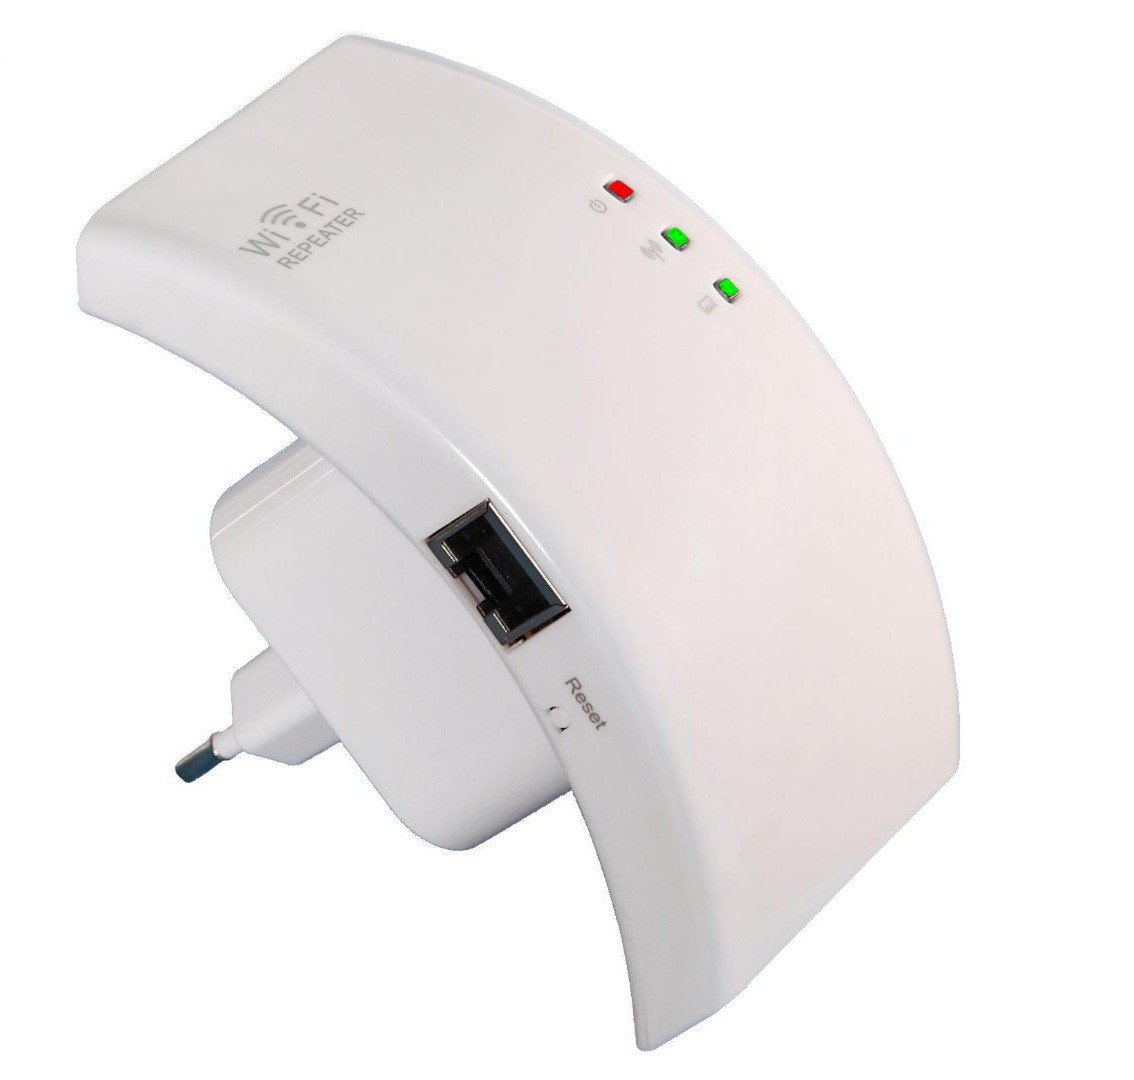 CM3 WiFi Repeater Access Point 300/150/54